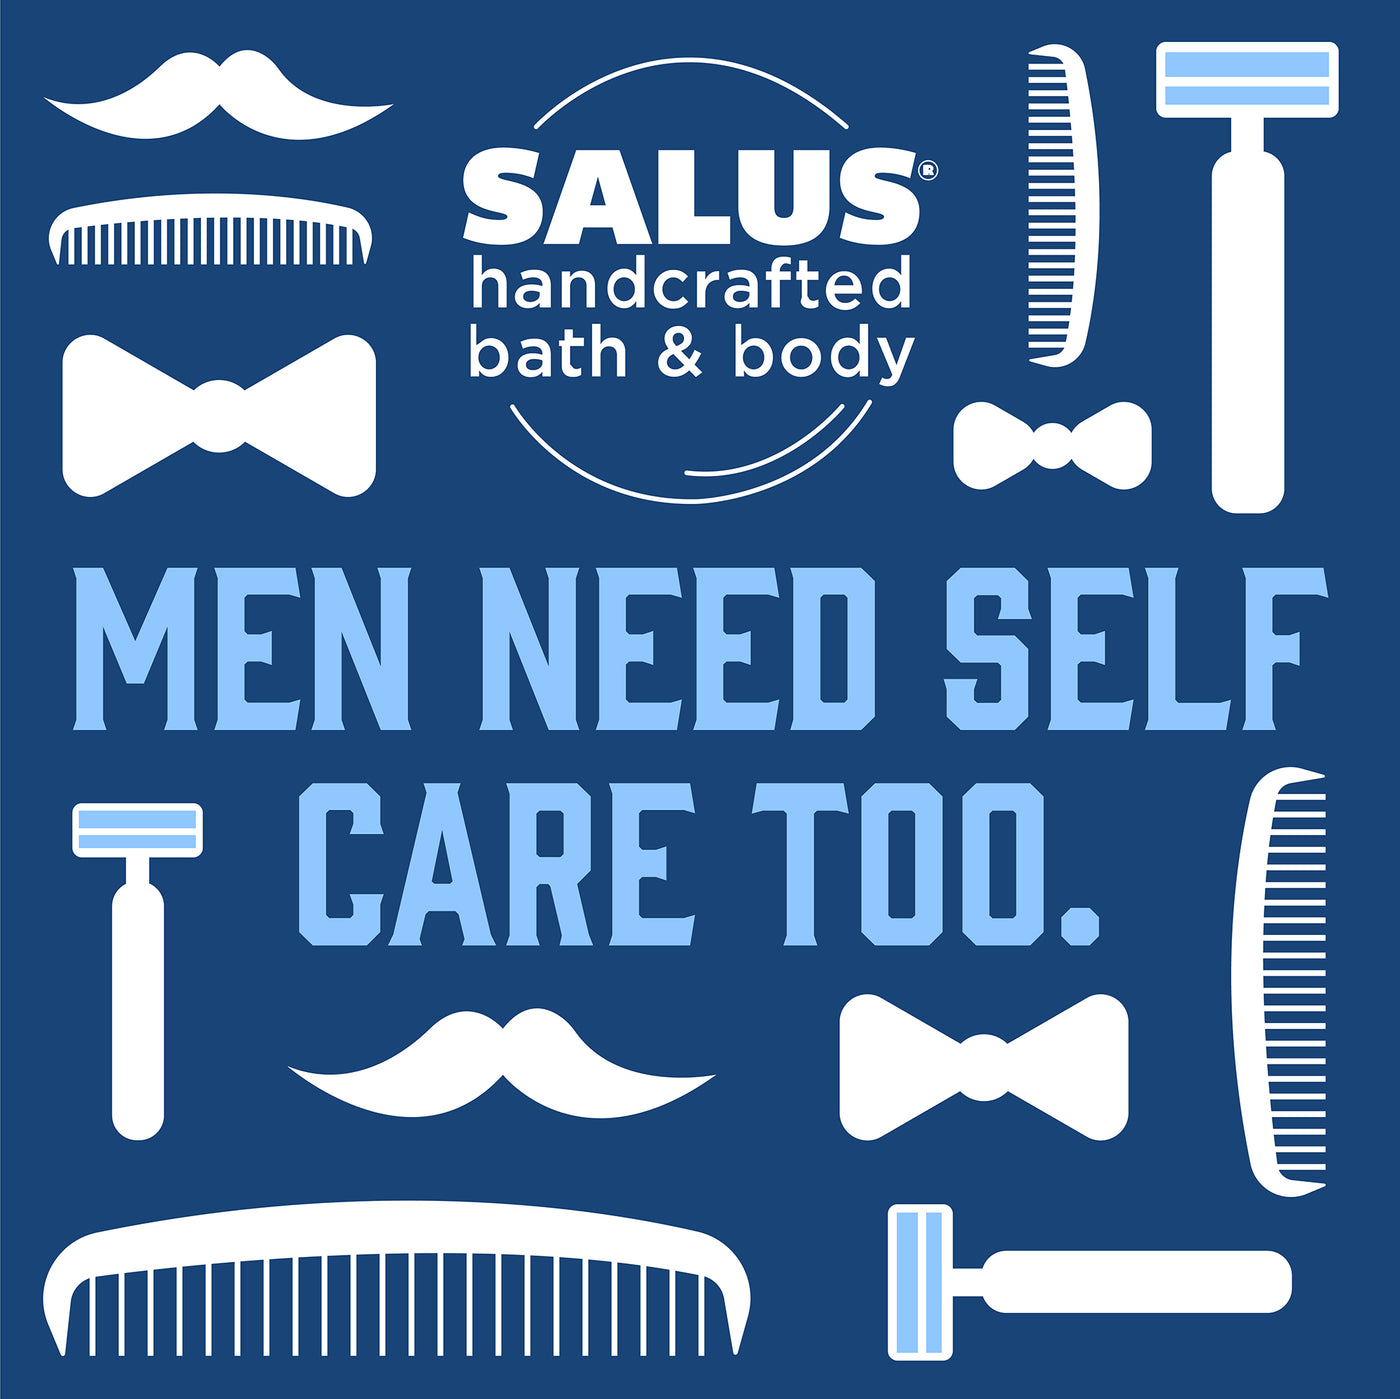 Men Need Self Care Too - A Father's Day PSA